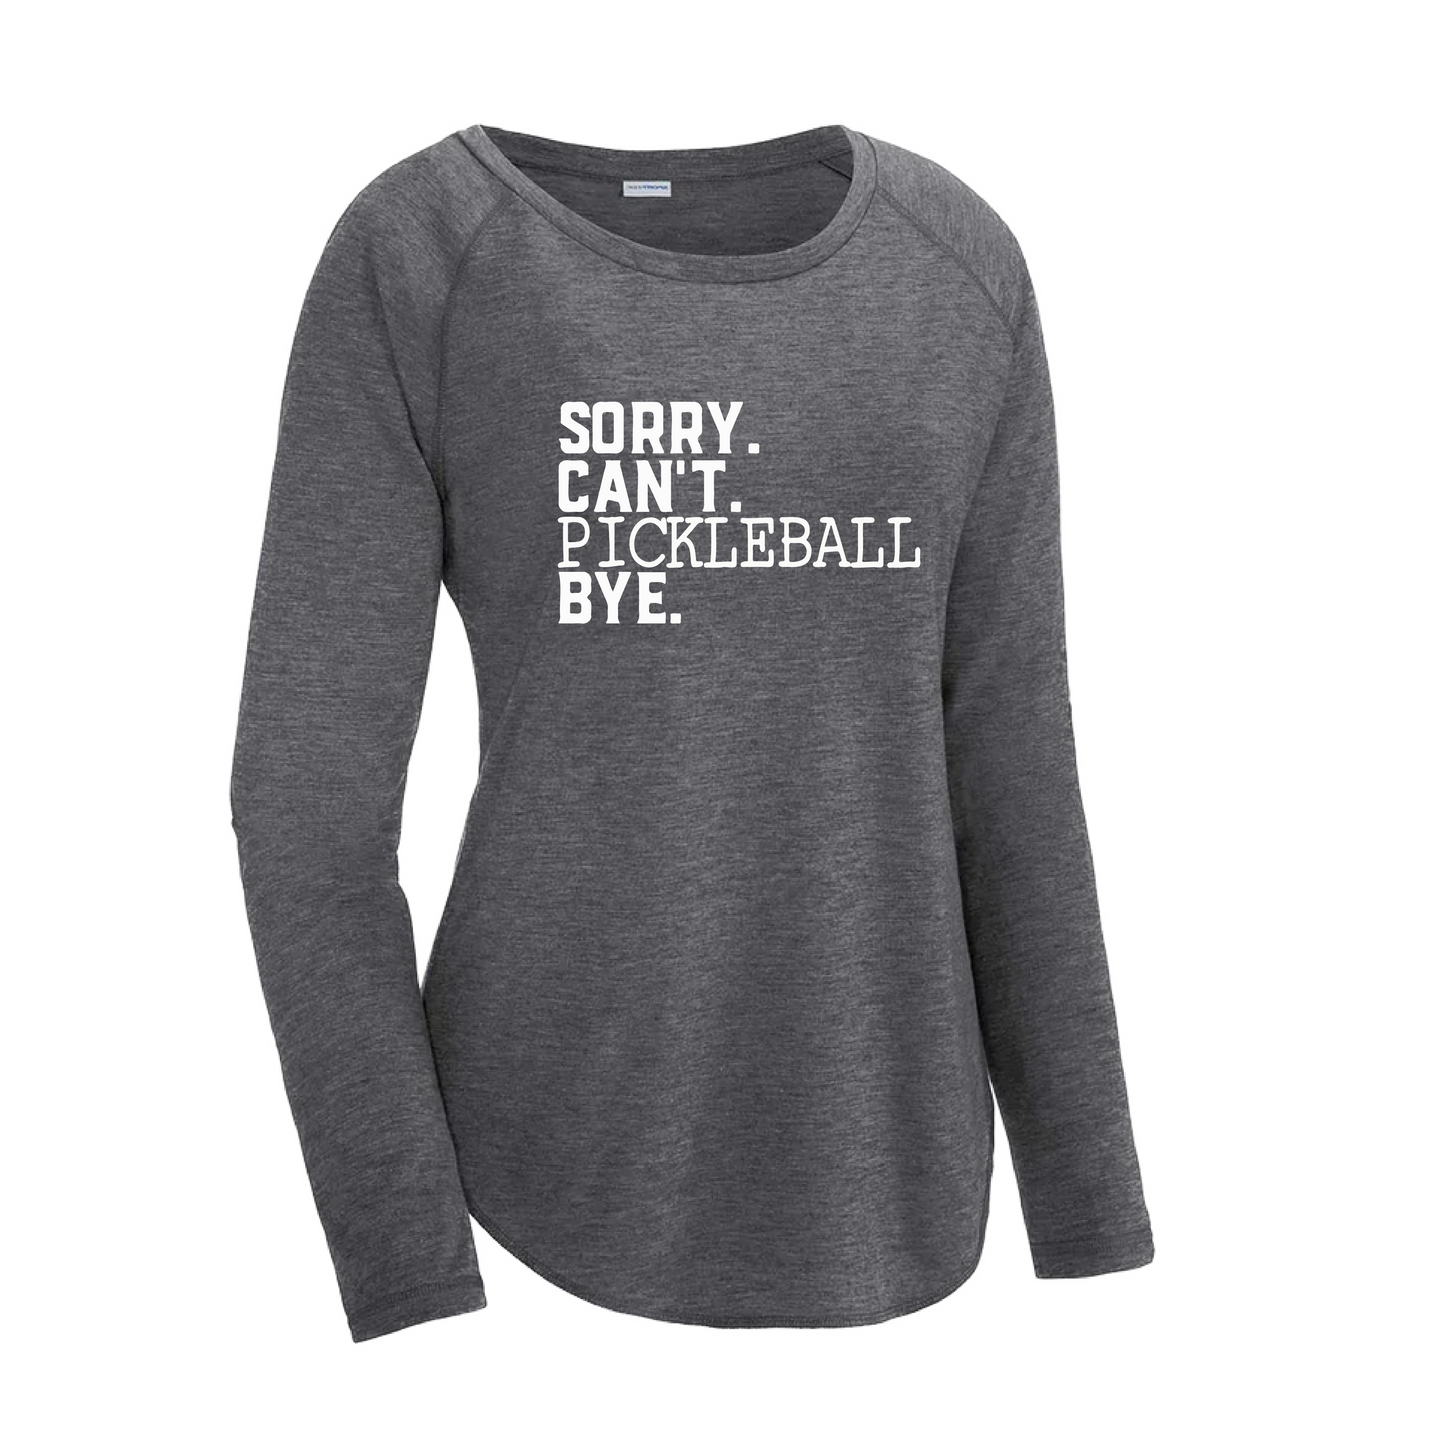 Sorry Can't Pickleball Bye | Women's Long Sleeve Scoop Neck Pickleball Shirts | 75/13/12 poly/cotton/rayon